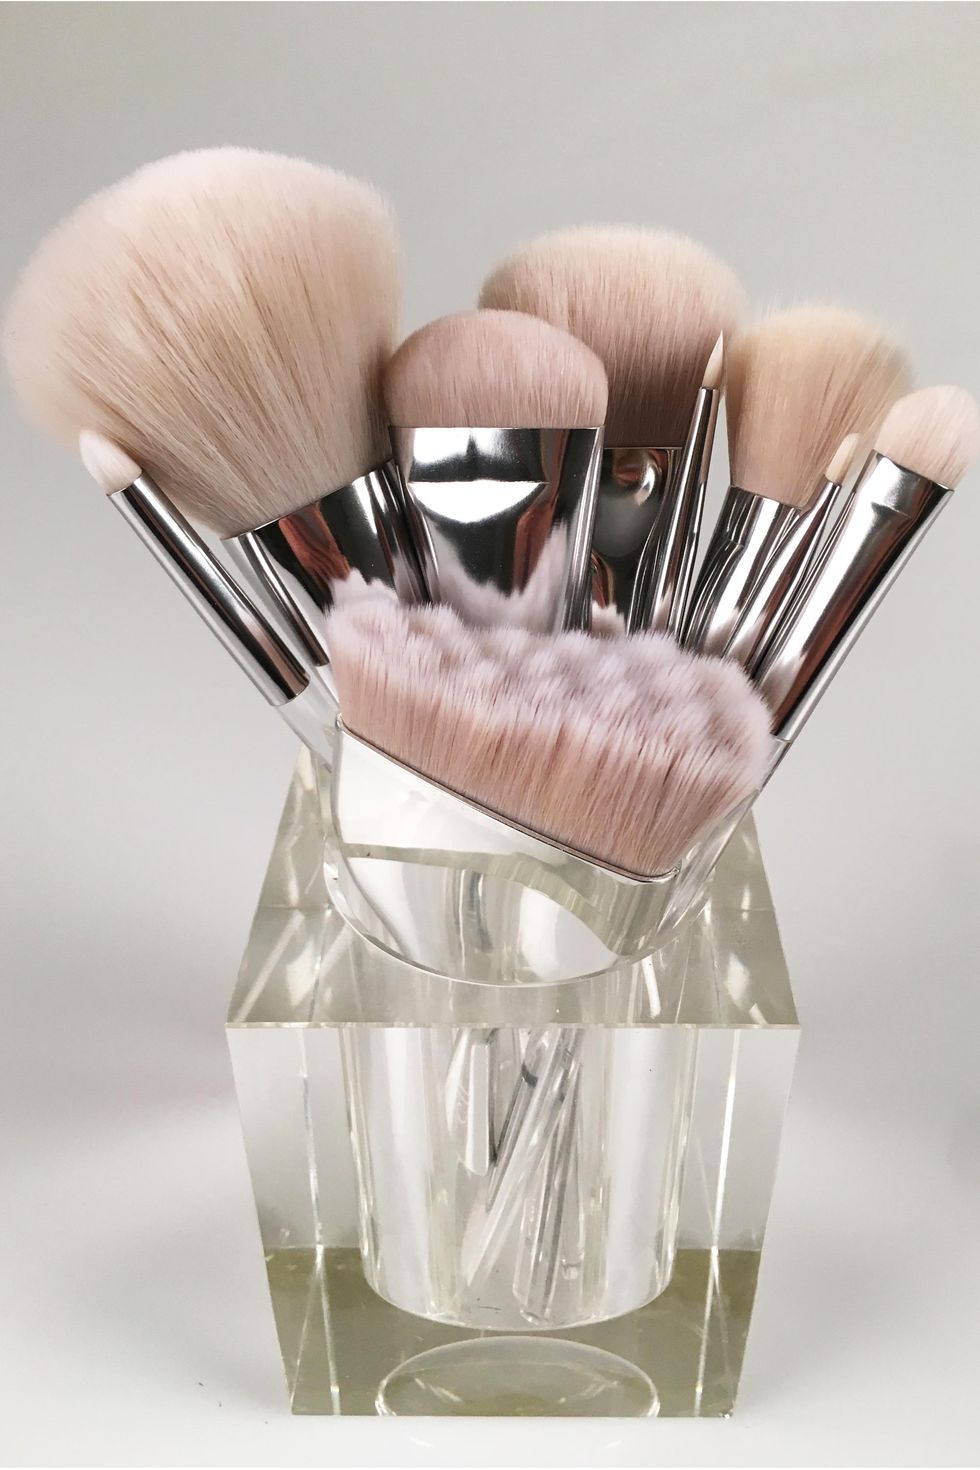 Brush, Hair accessory, Beige, Paint brush, Makeup brushes, Cosmetics, Natural material, Silver, Fashion design, Personal care, 